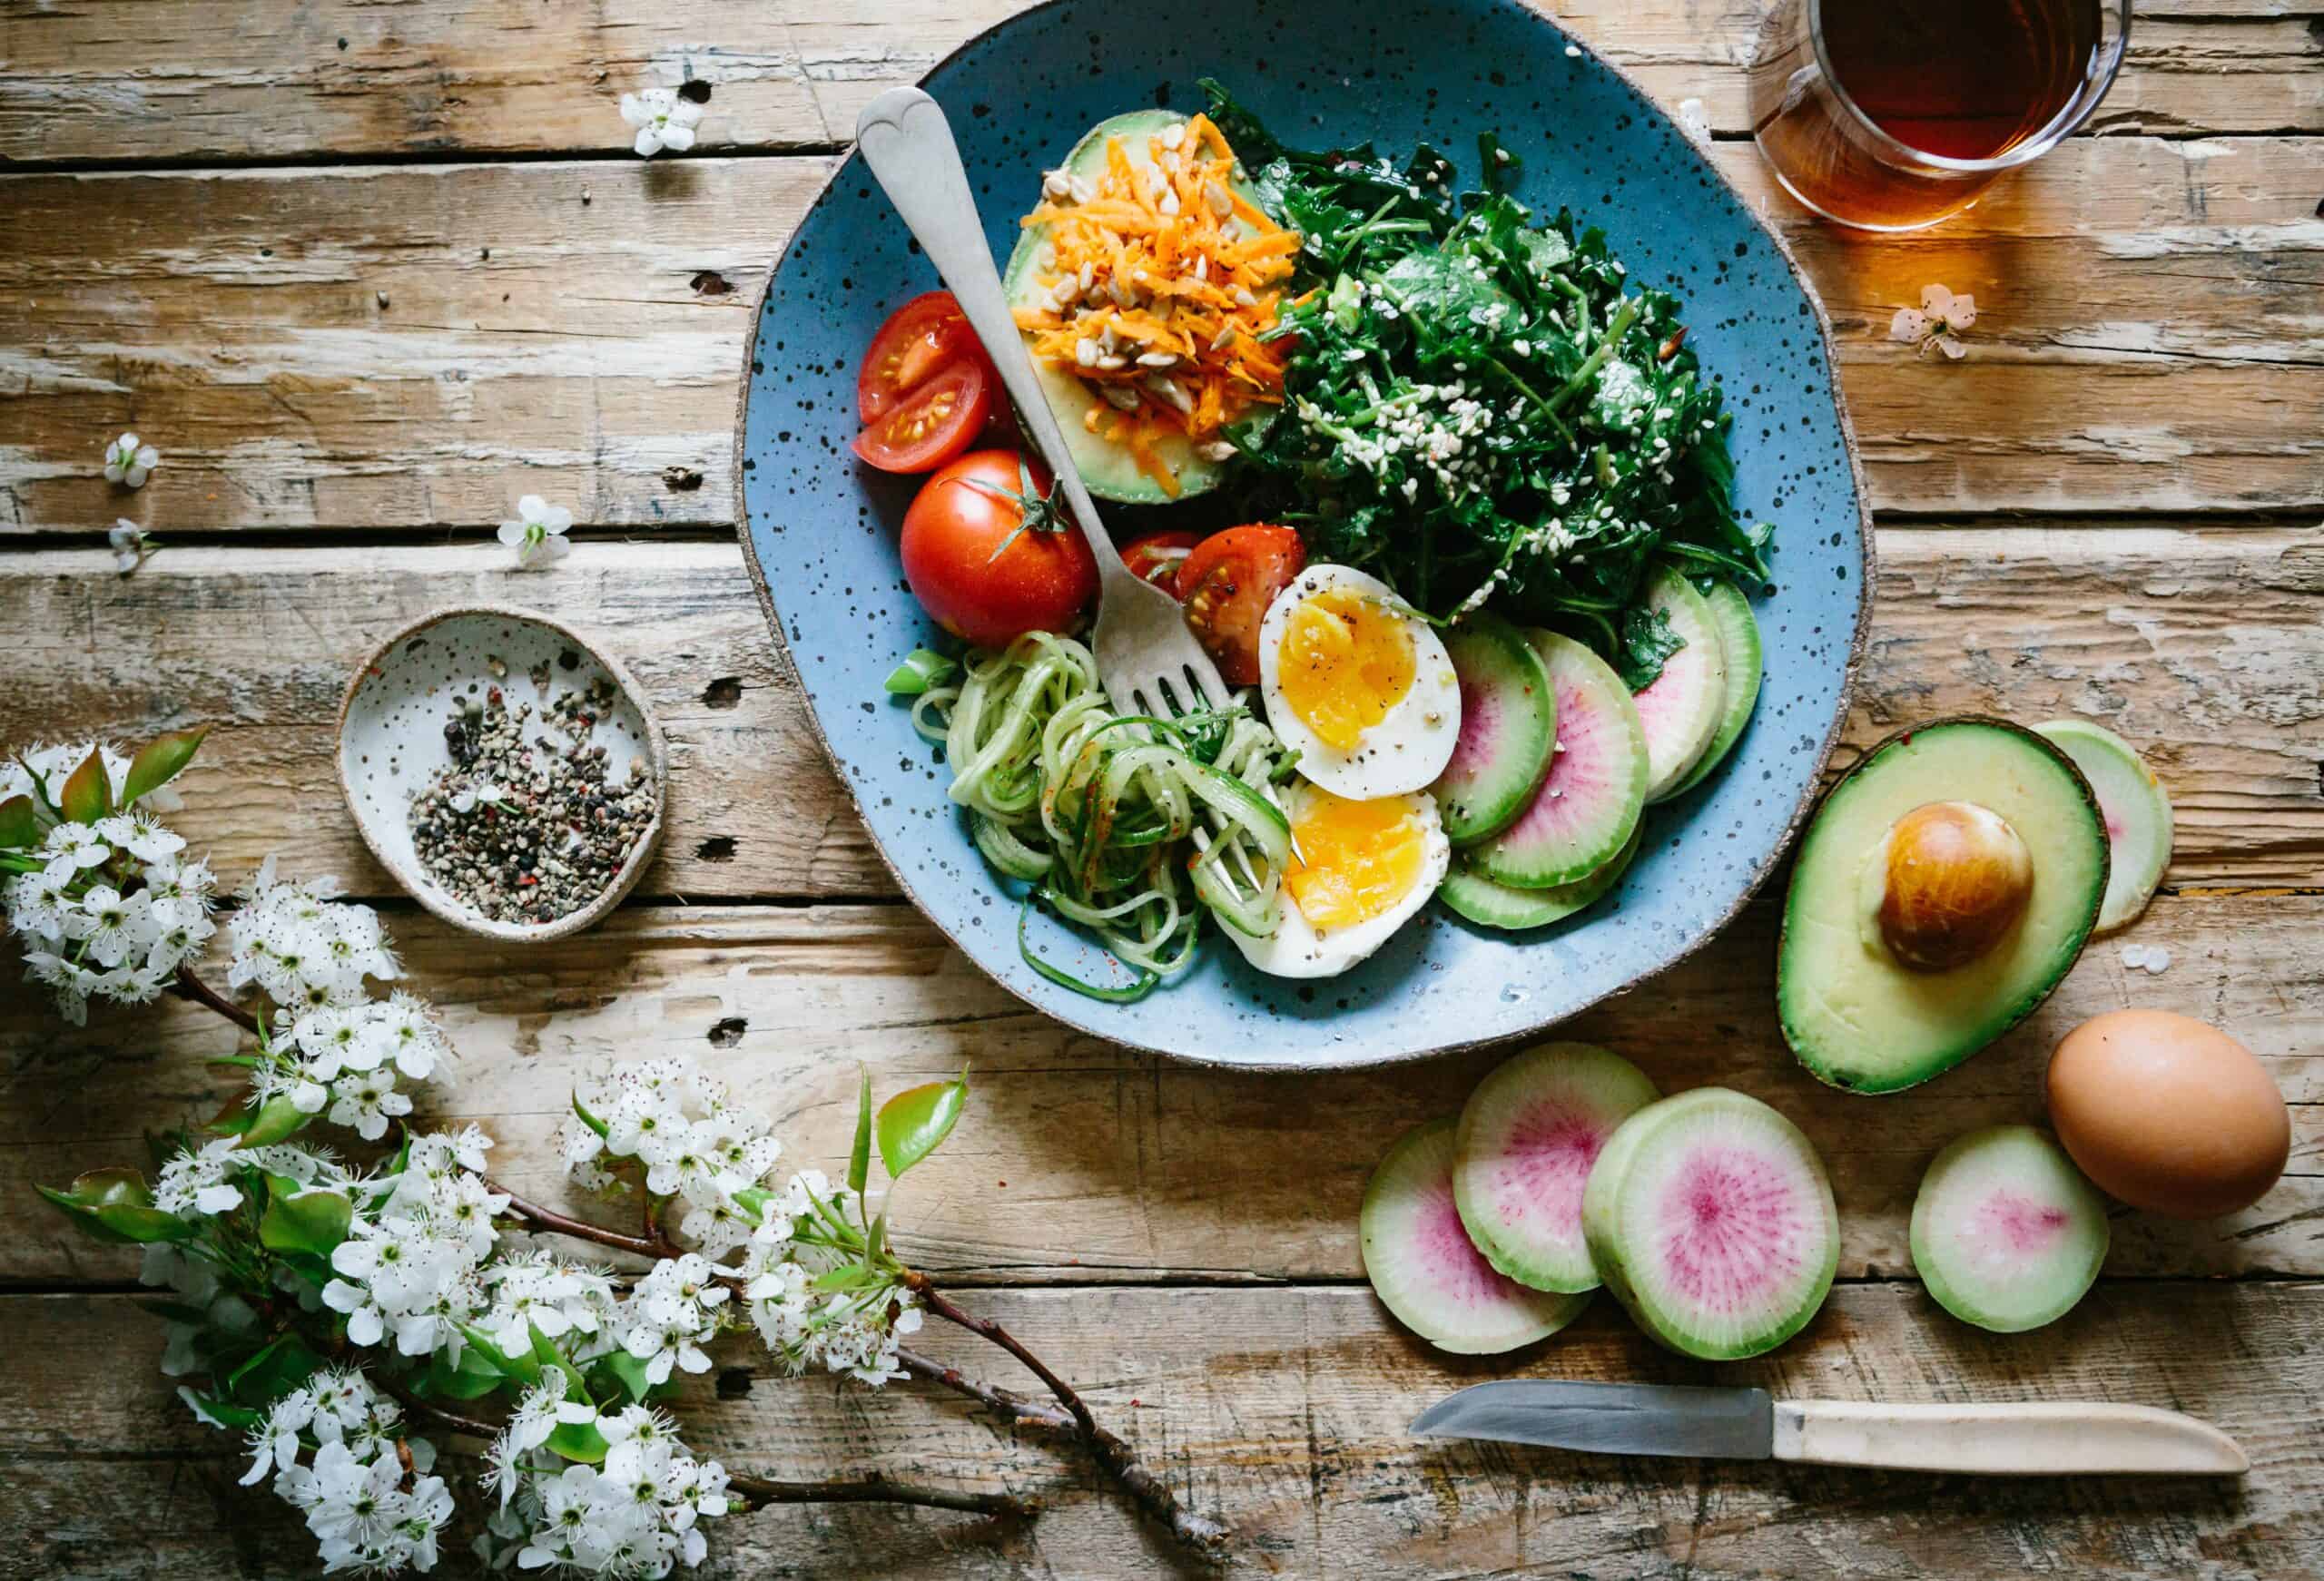 7 Homemade Diet Foods That Are Good For Your Health